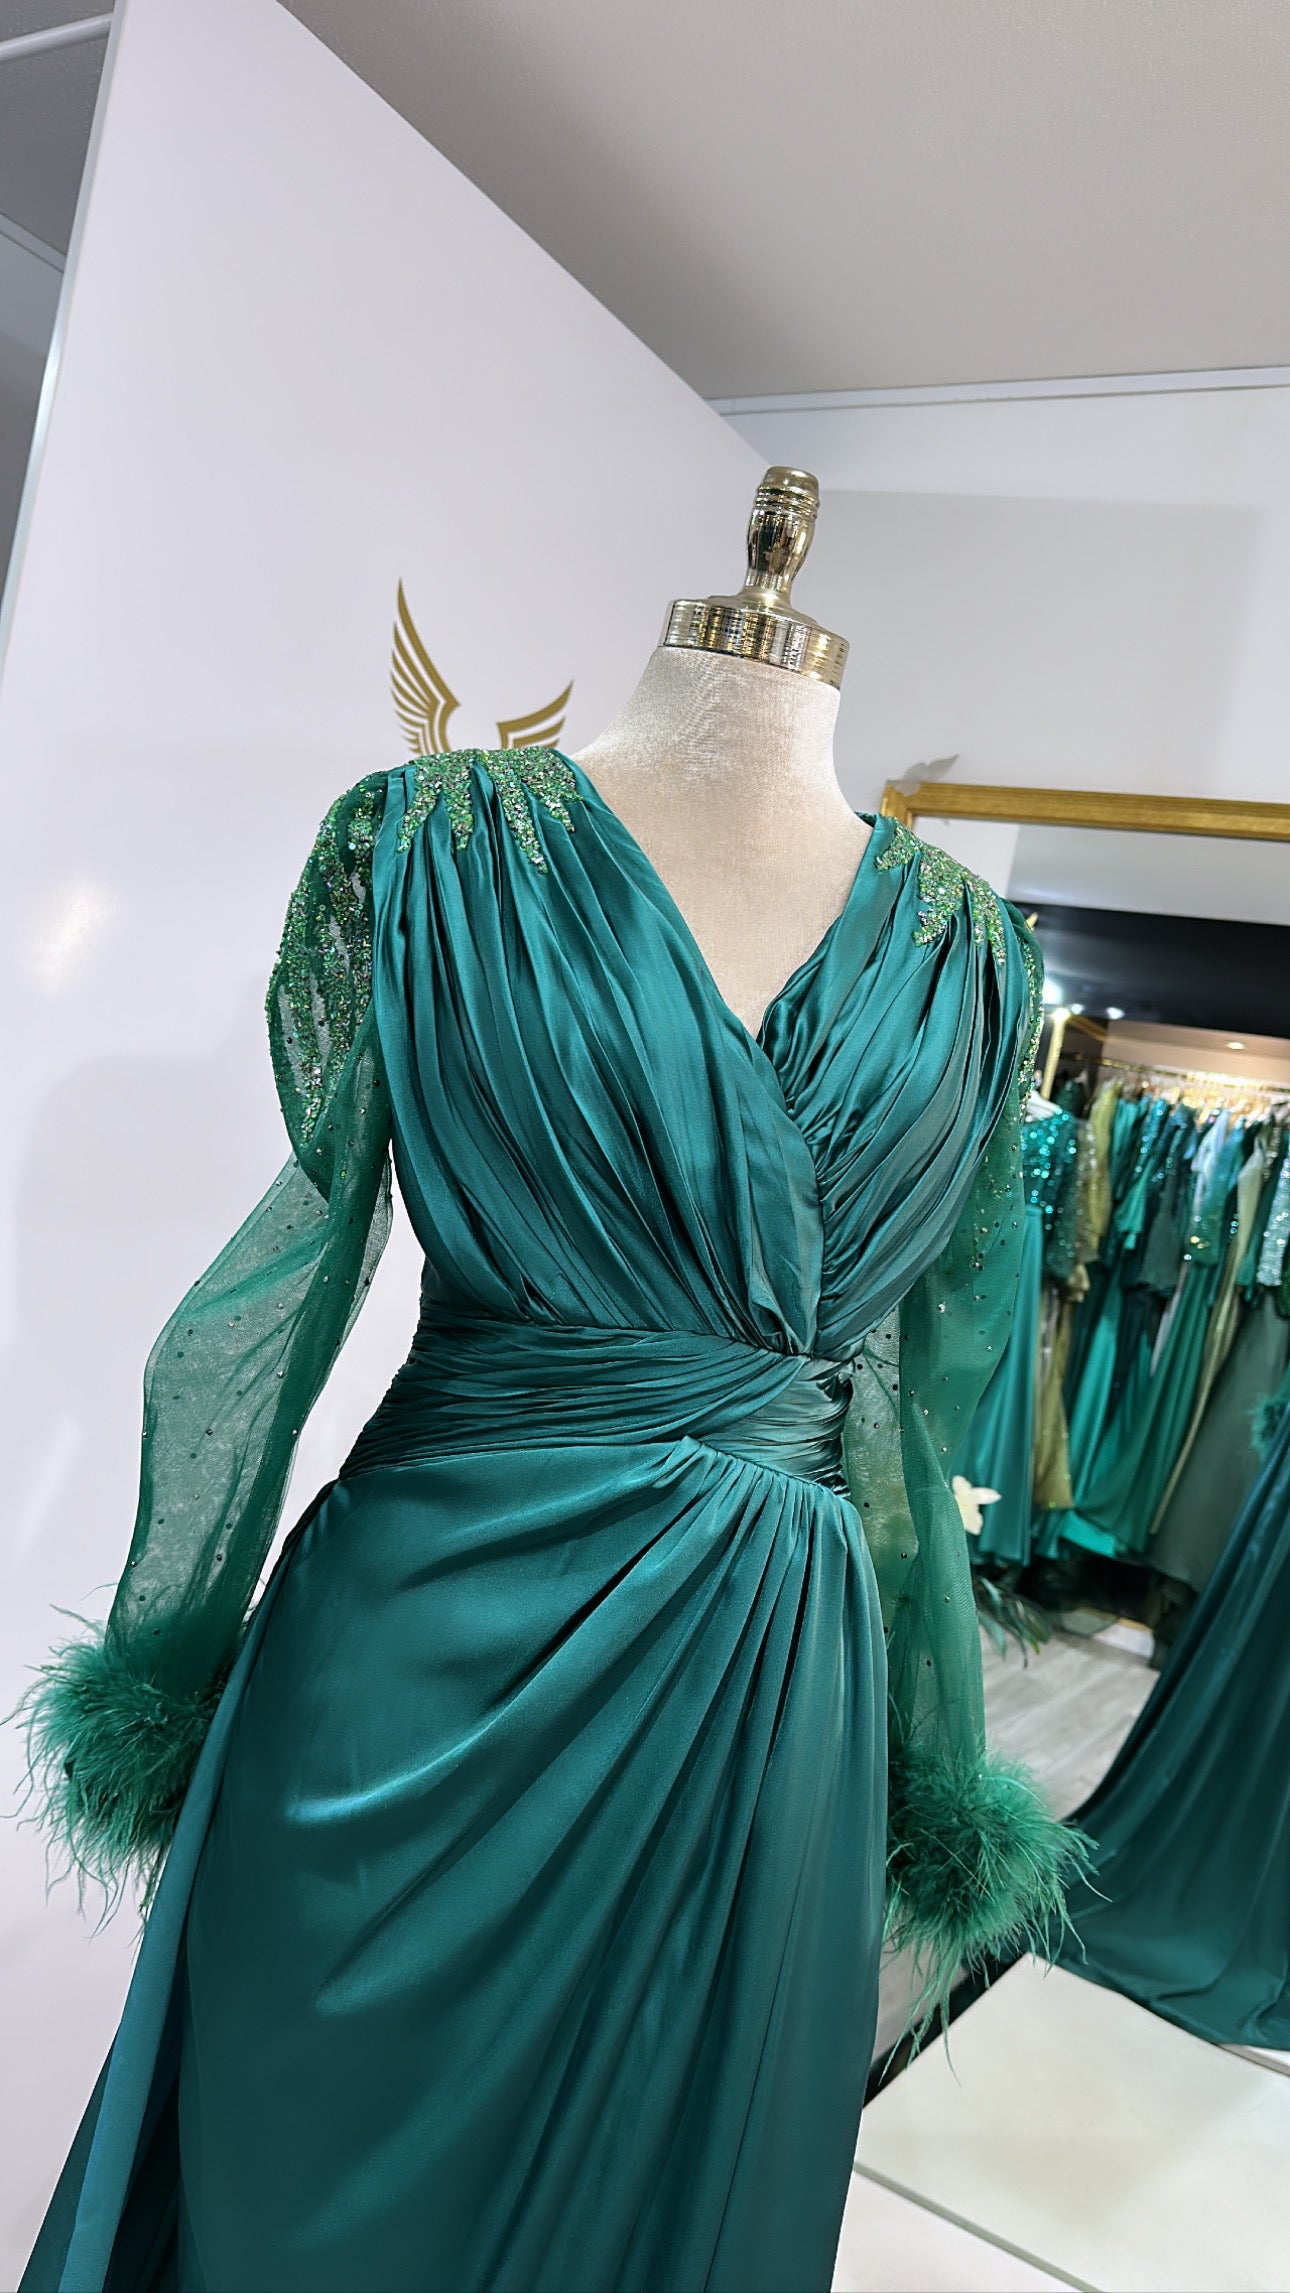 Elegant green dress decorated with beads, feathers